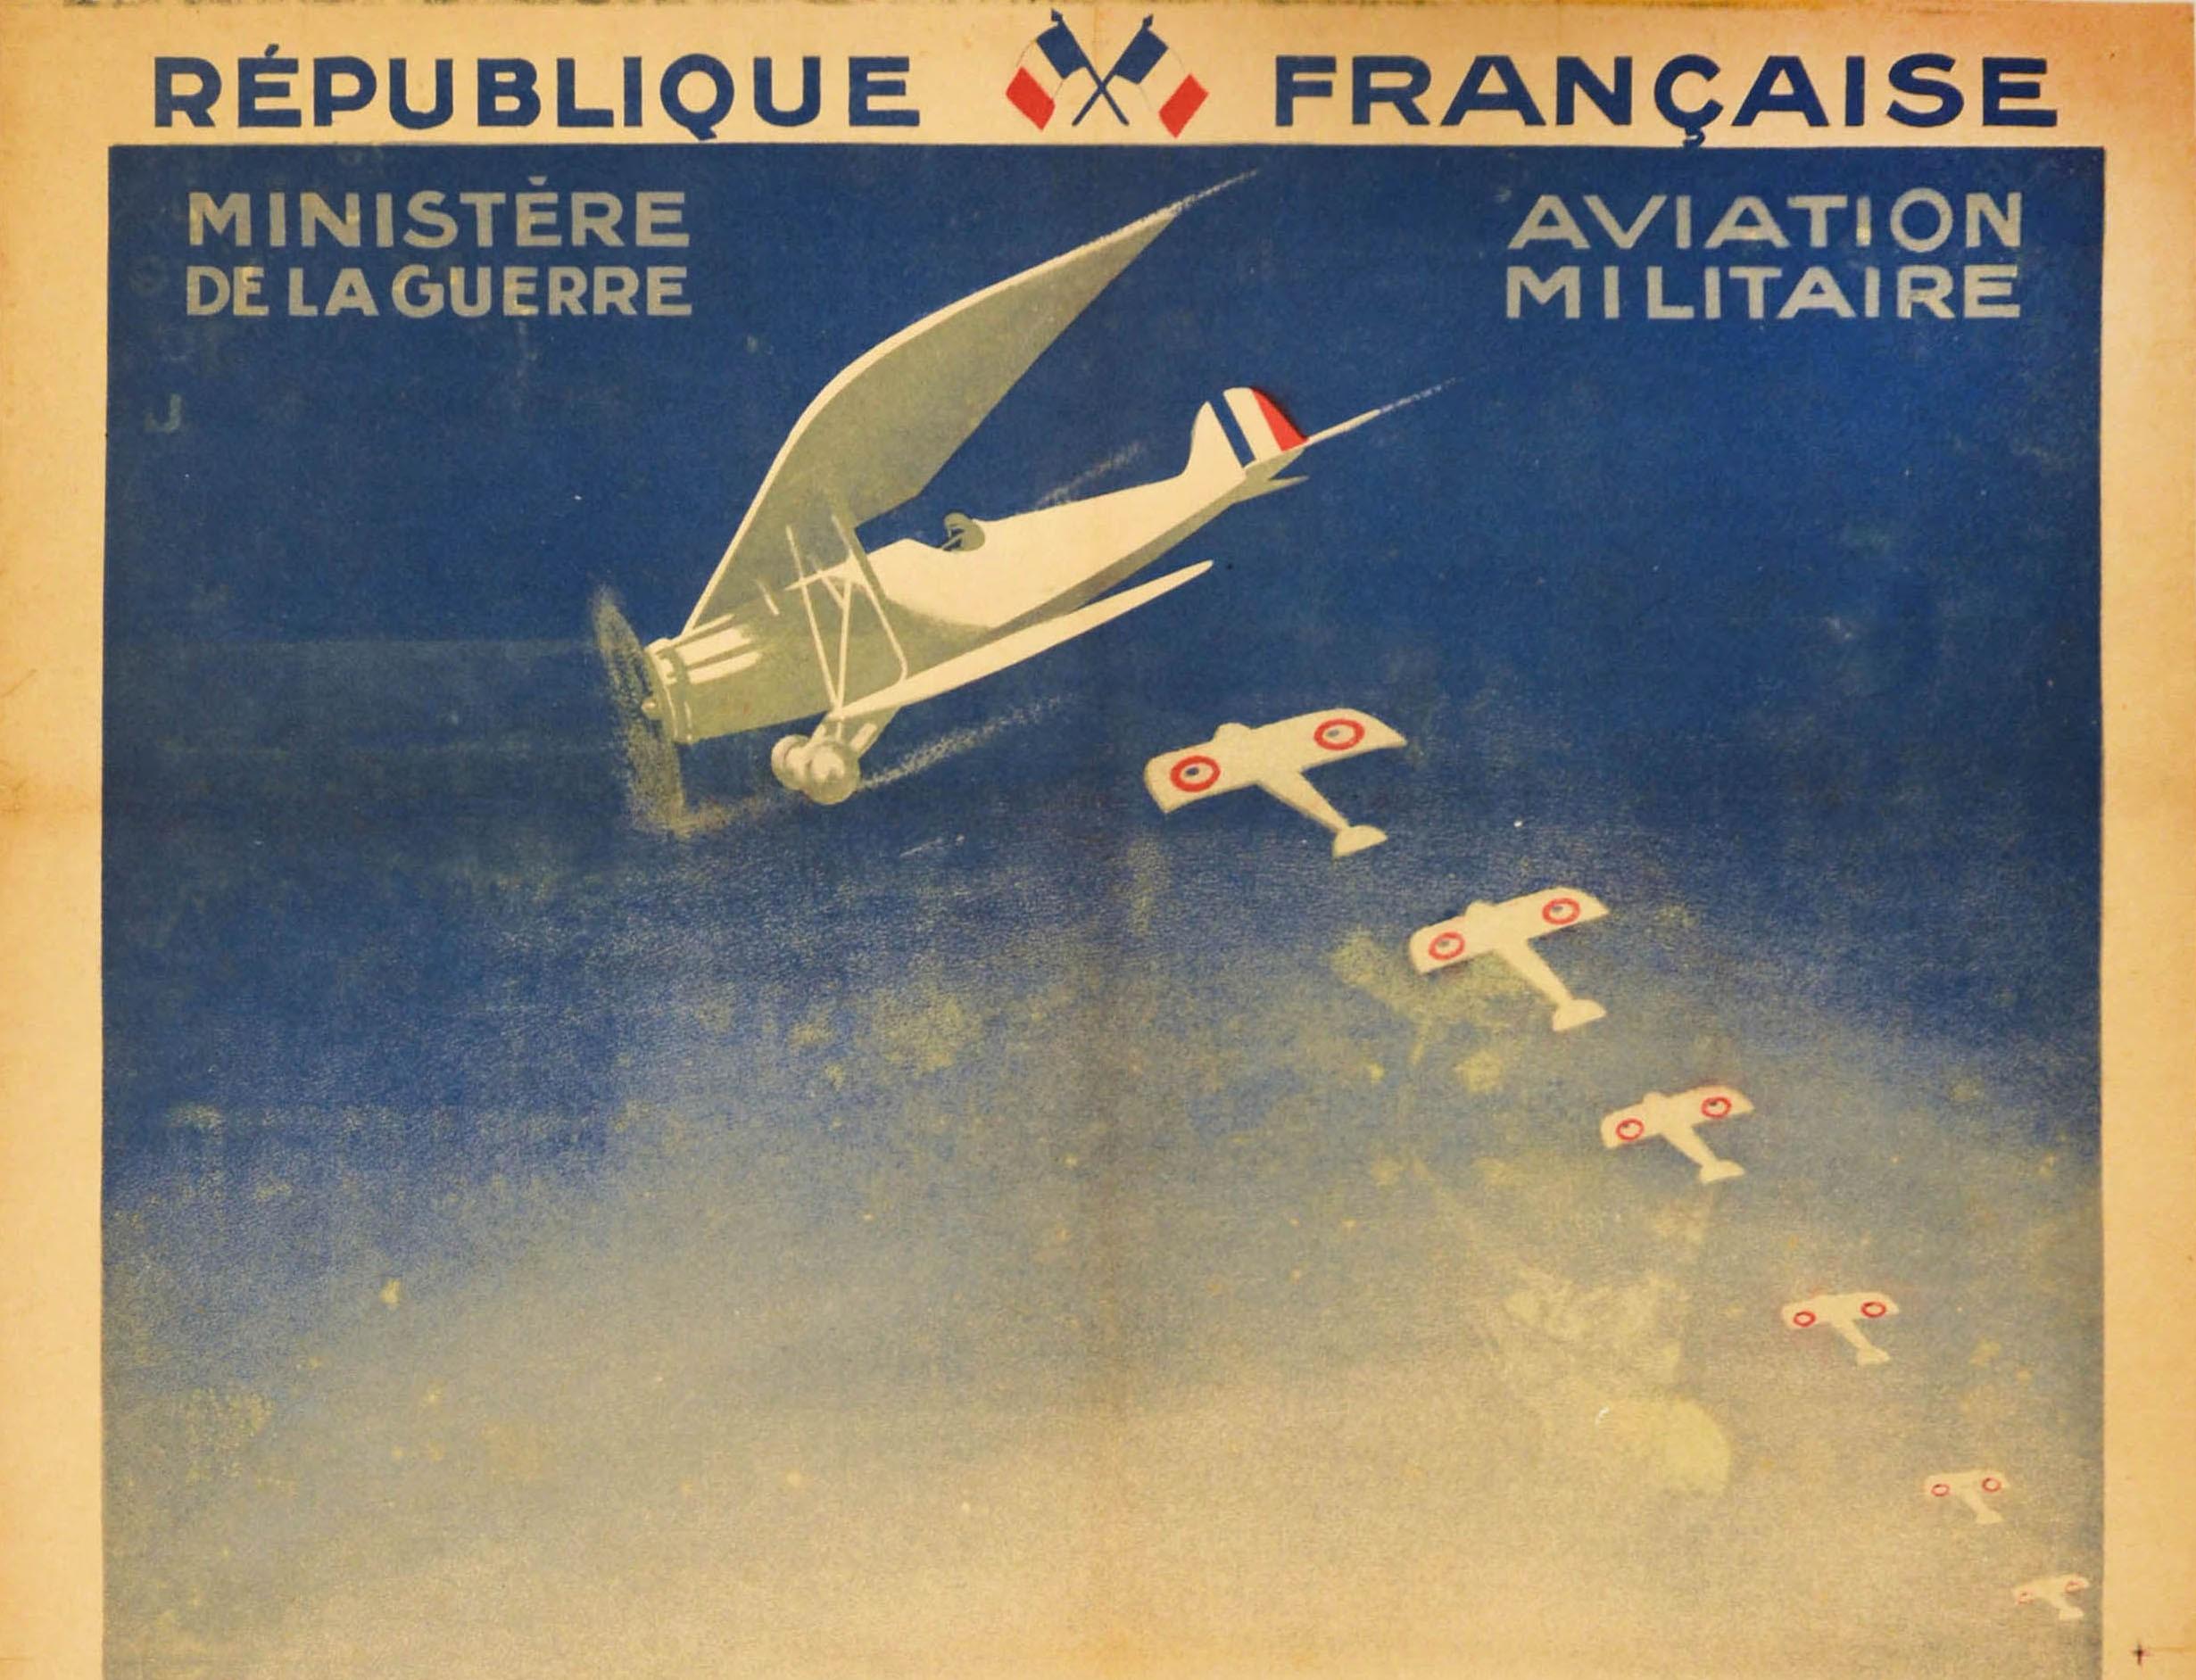 Original antique recruitment poster to encourage young people to join the air force for their military service - Republique Francaise Ministere de la Guerre Aviation Militaire Jeunes Francaise / French Republic Ministry of War Military Aviation